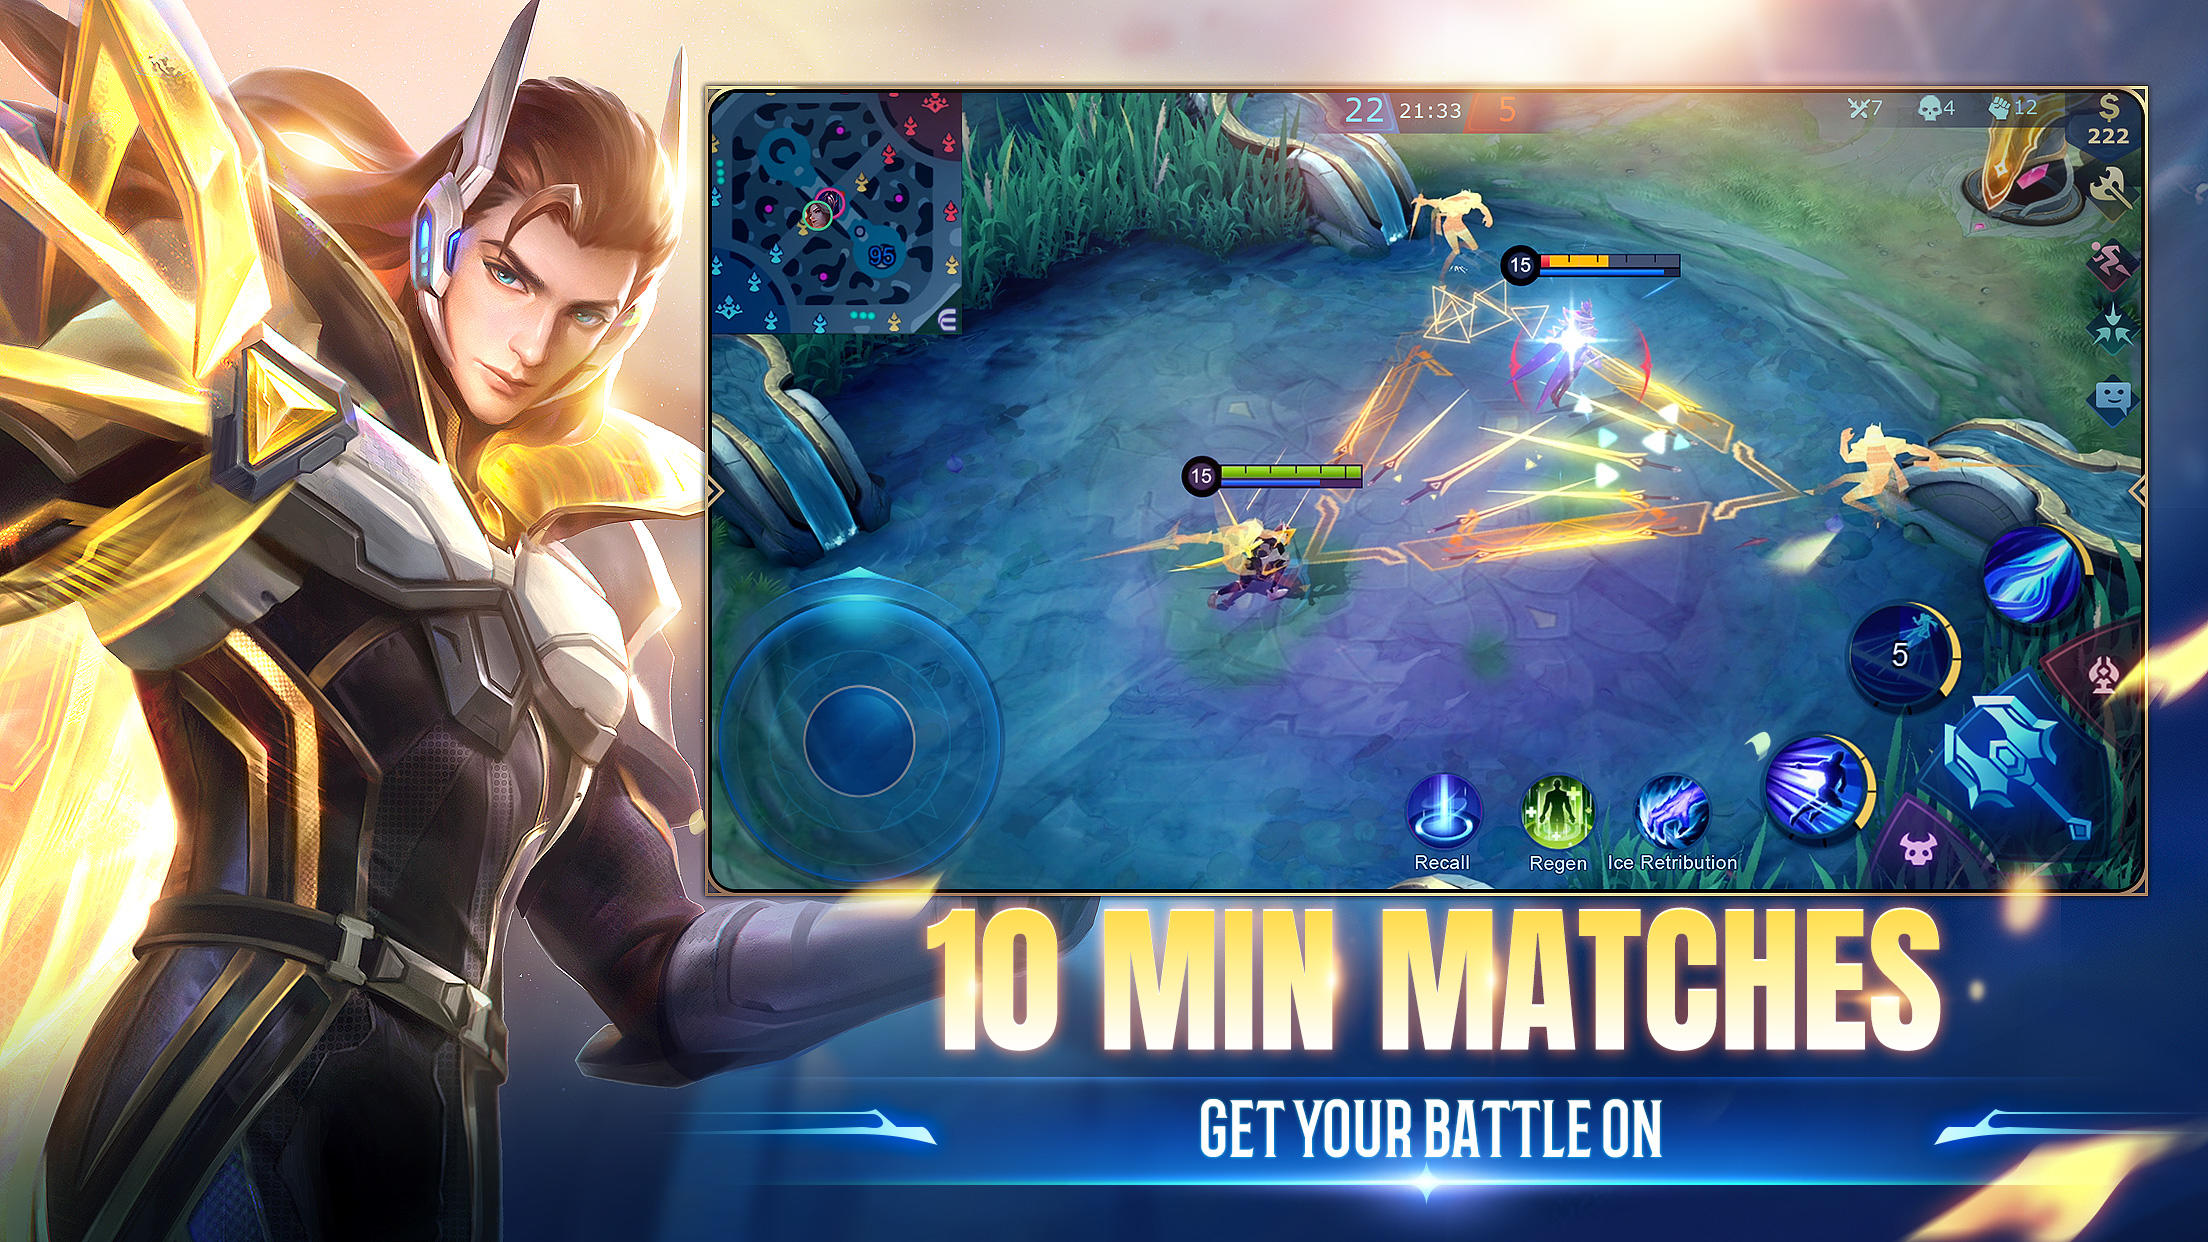 Mobile Legends on PC - Download This Action Game Now